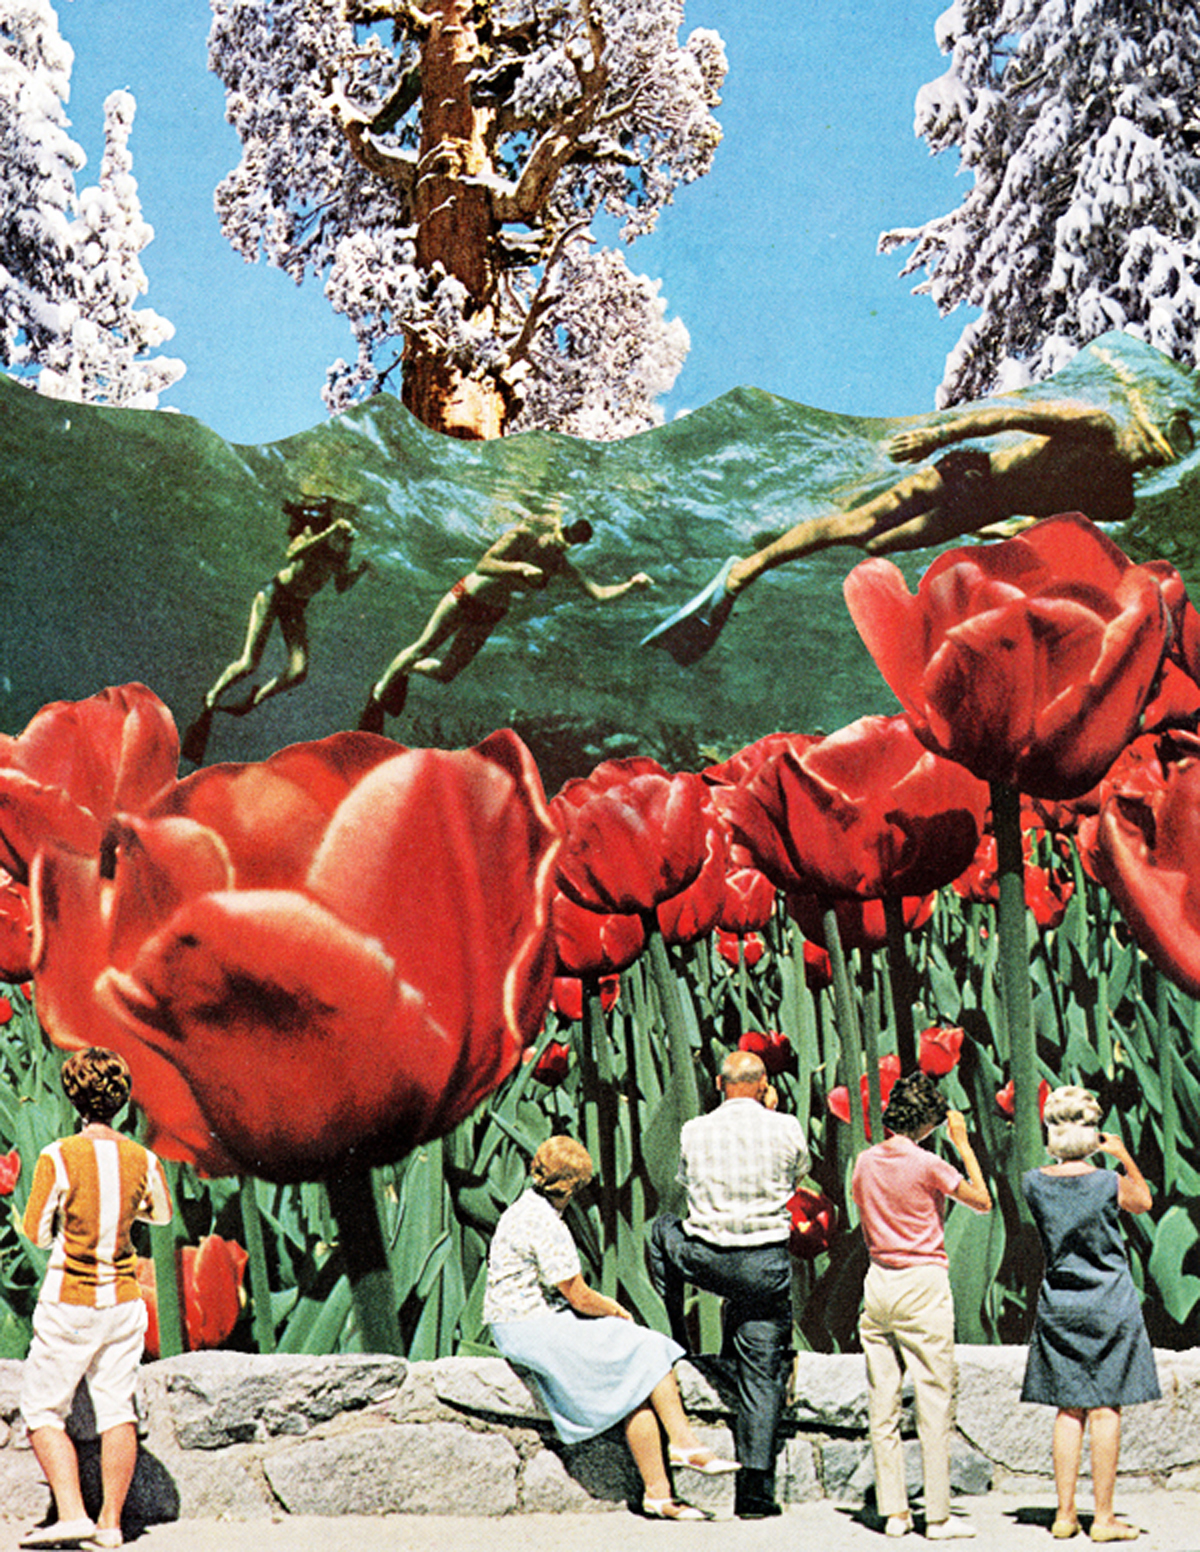 Swimming in Tulips